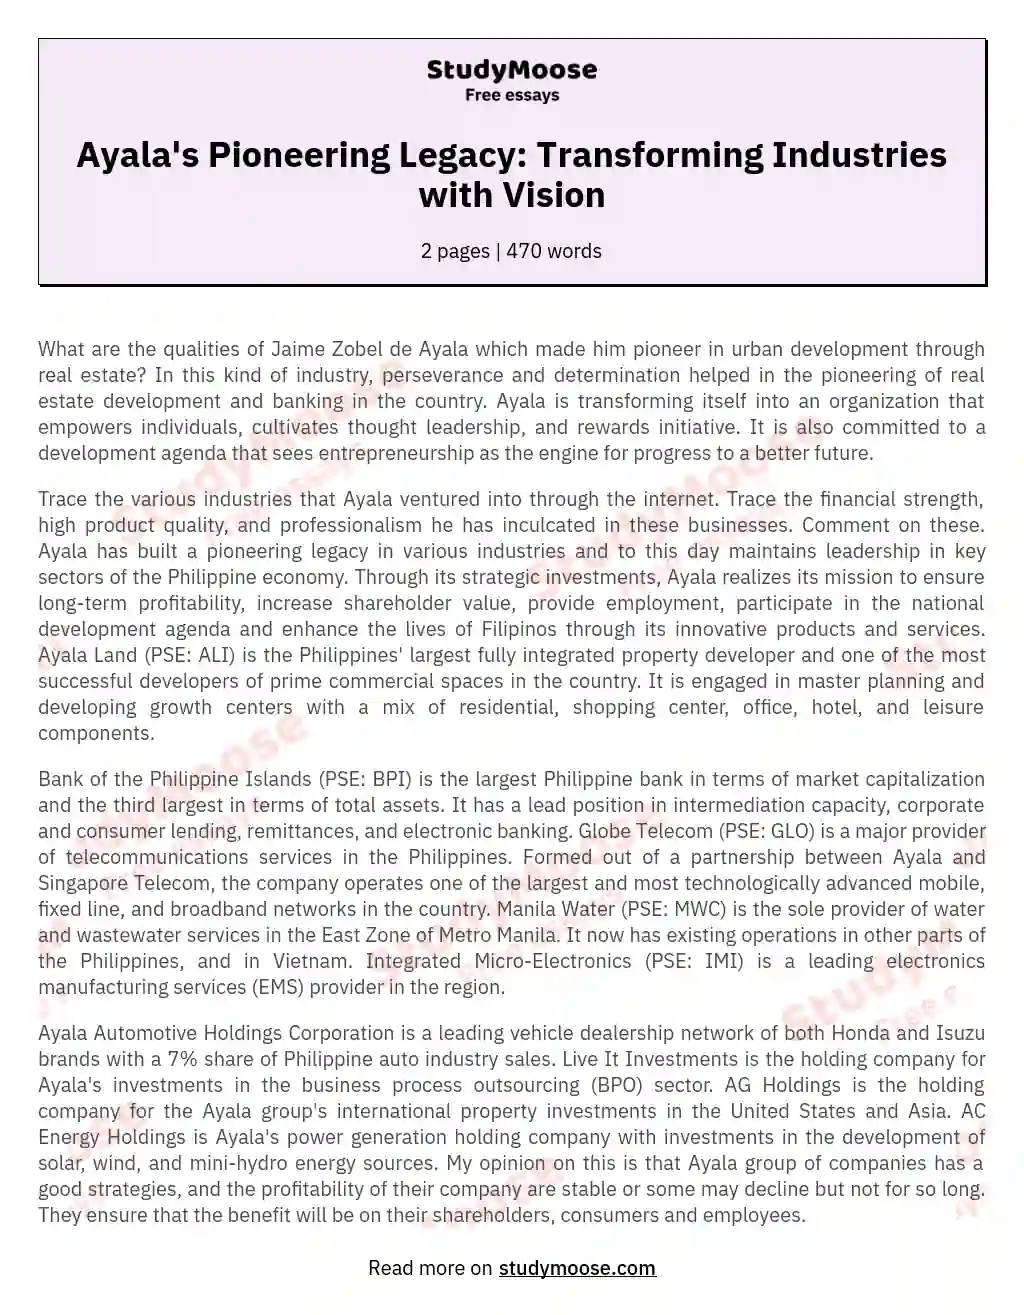 Ayala's Pioneering Legacy: Transforming Industries with Vision essay